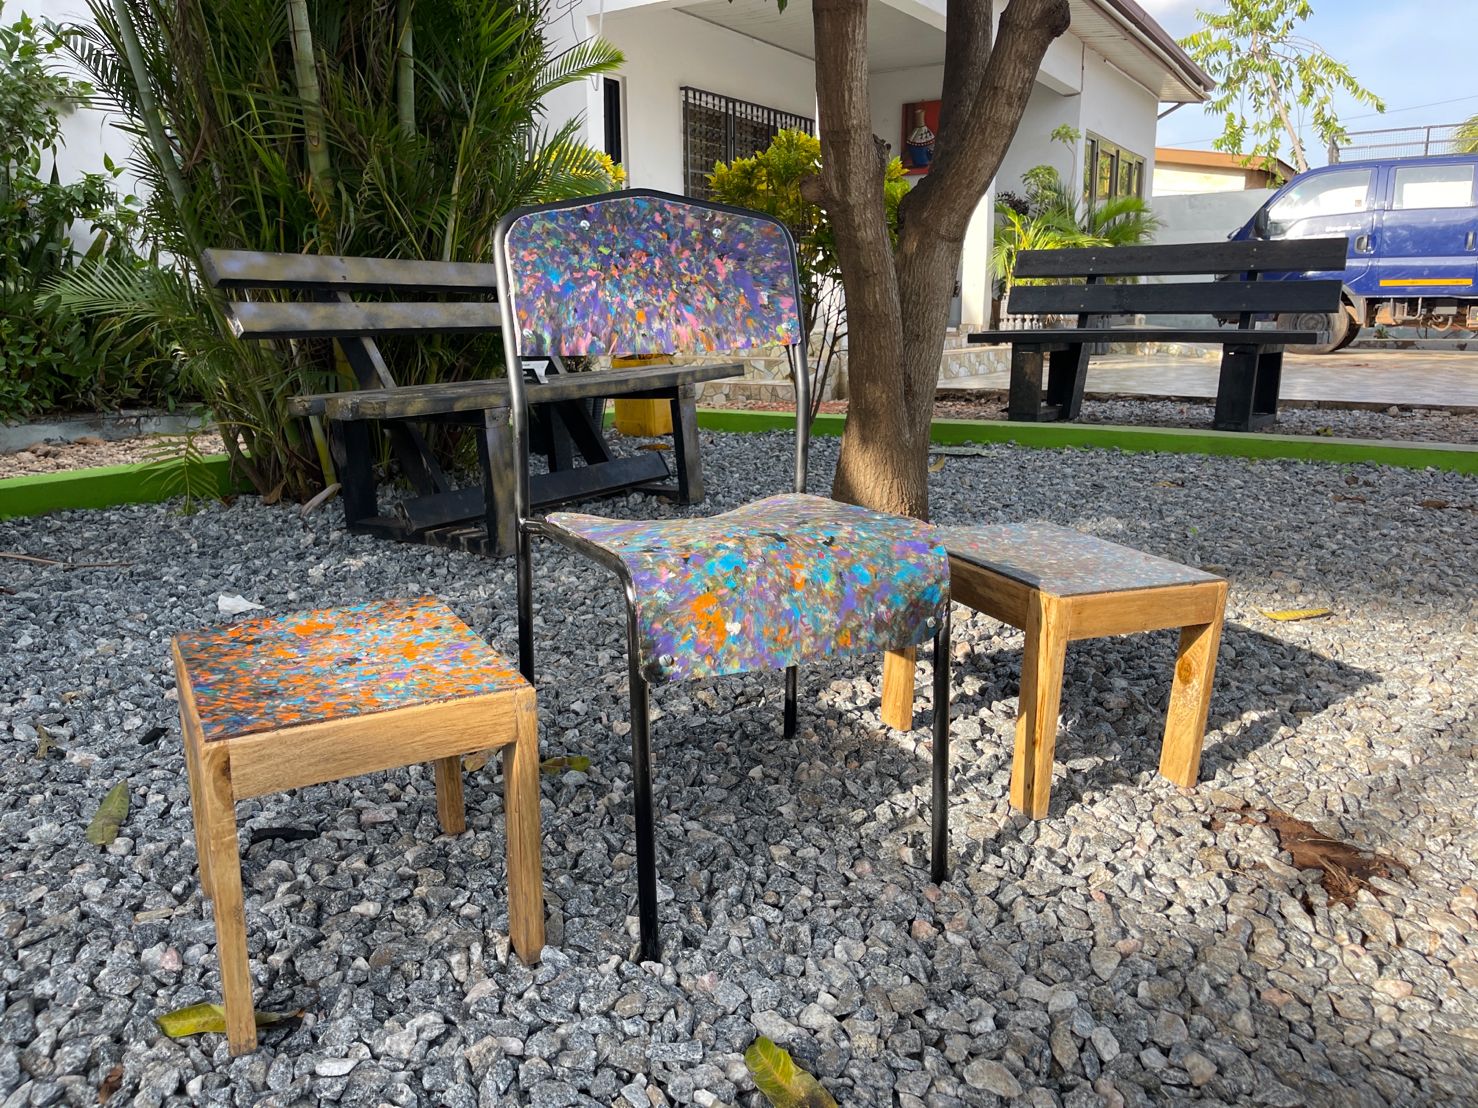 Furniture made using plastic waste.